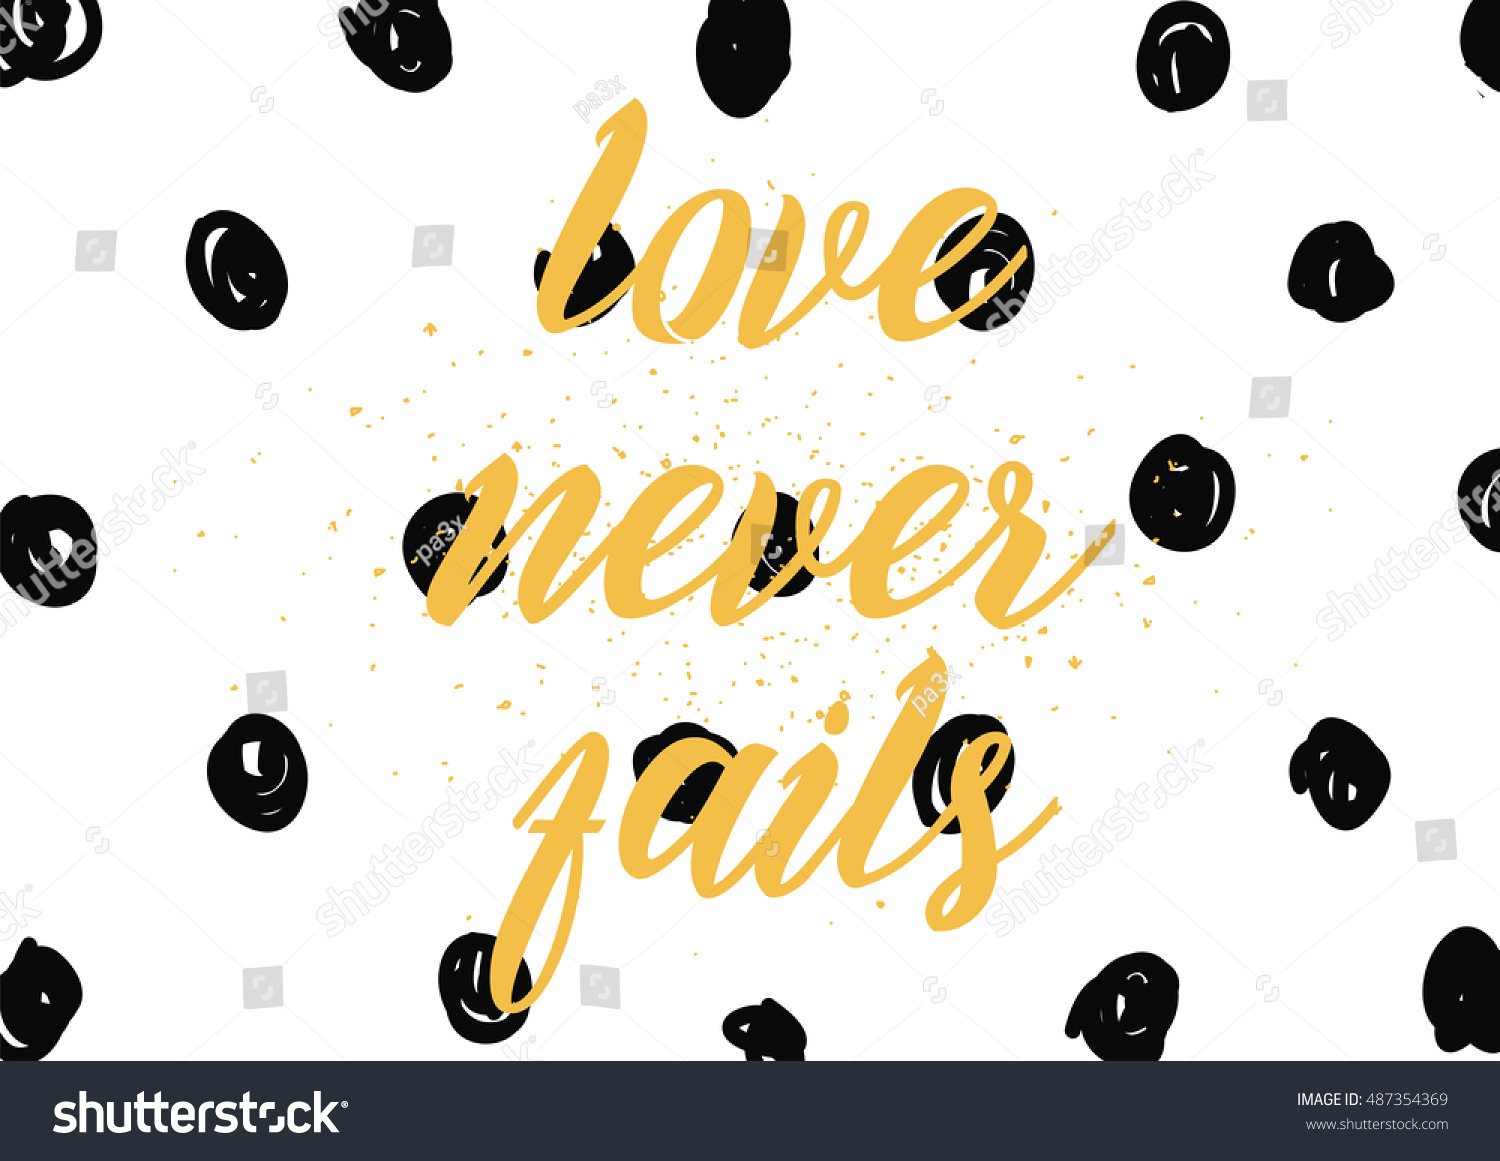 Love never fails romantic inspirational inscription Greeting card with calligraphy Hand drawn lettering design